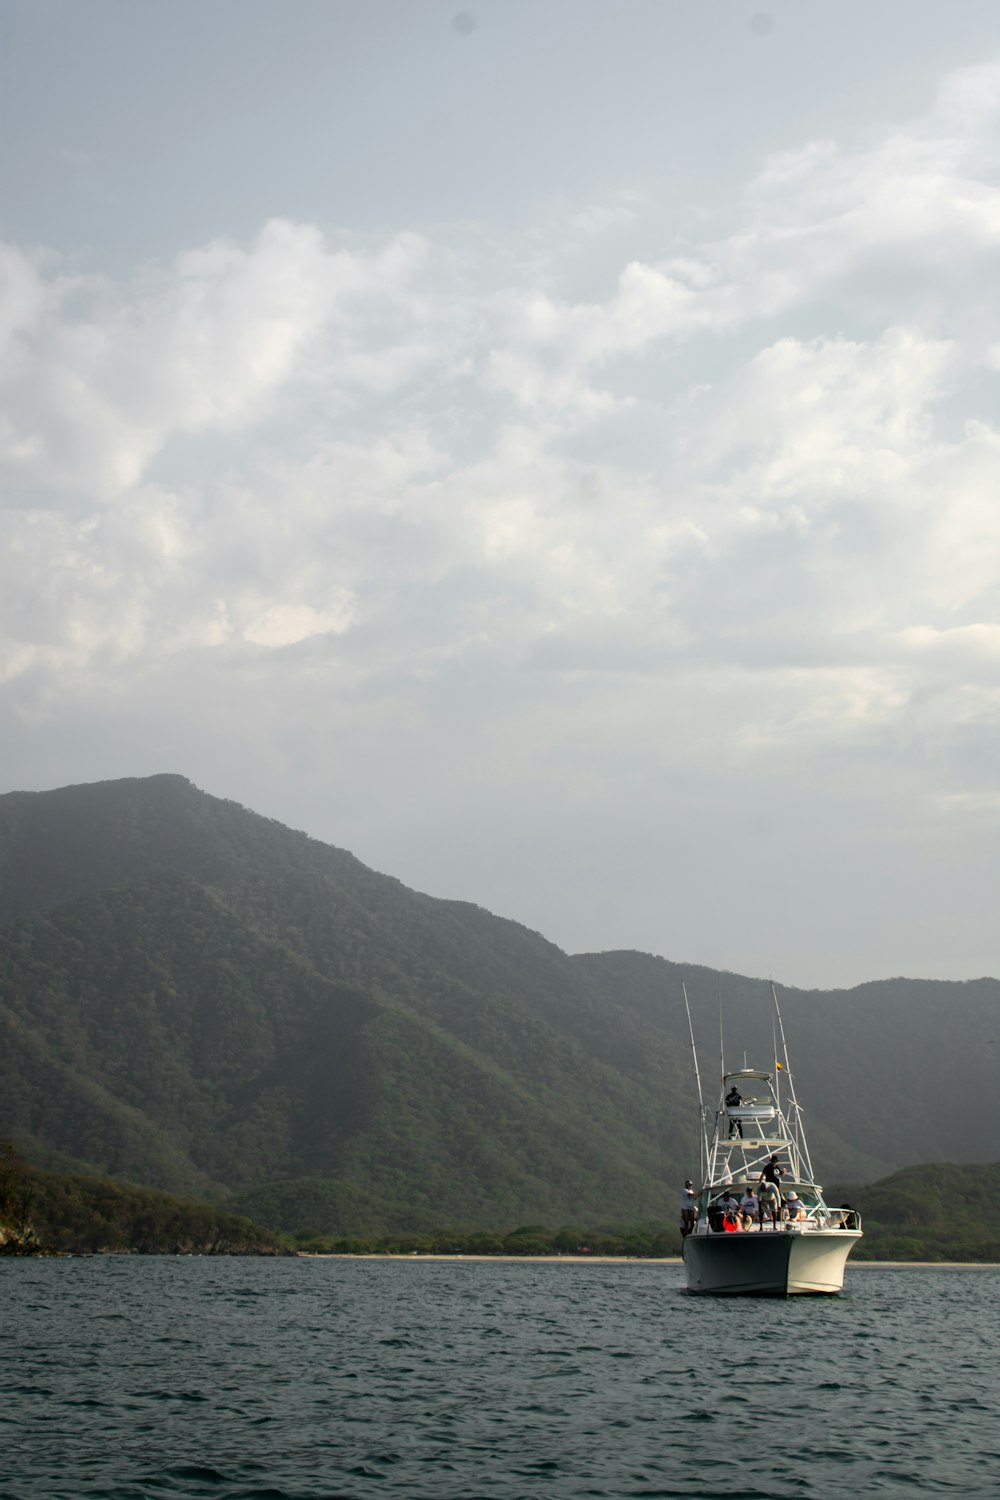 a fishing boat in a body of water with mountains in the background